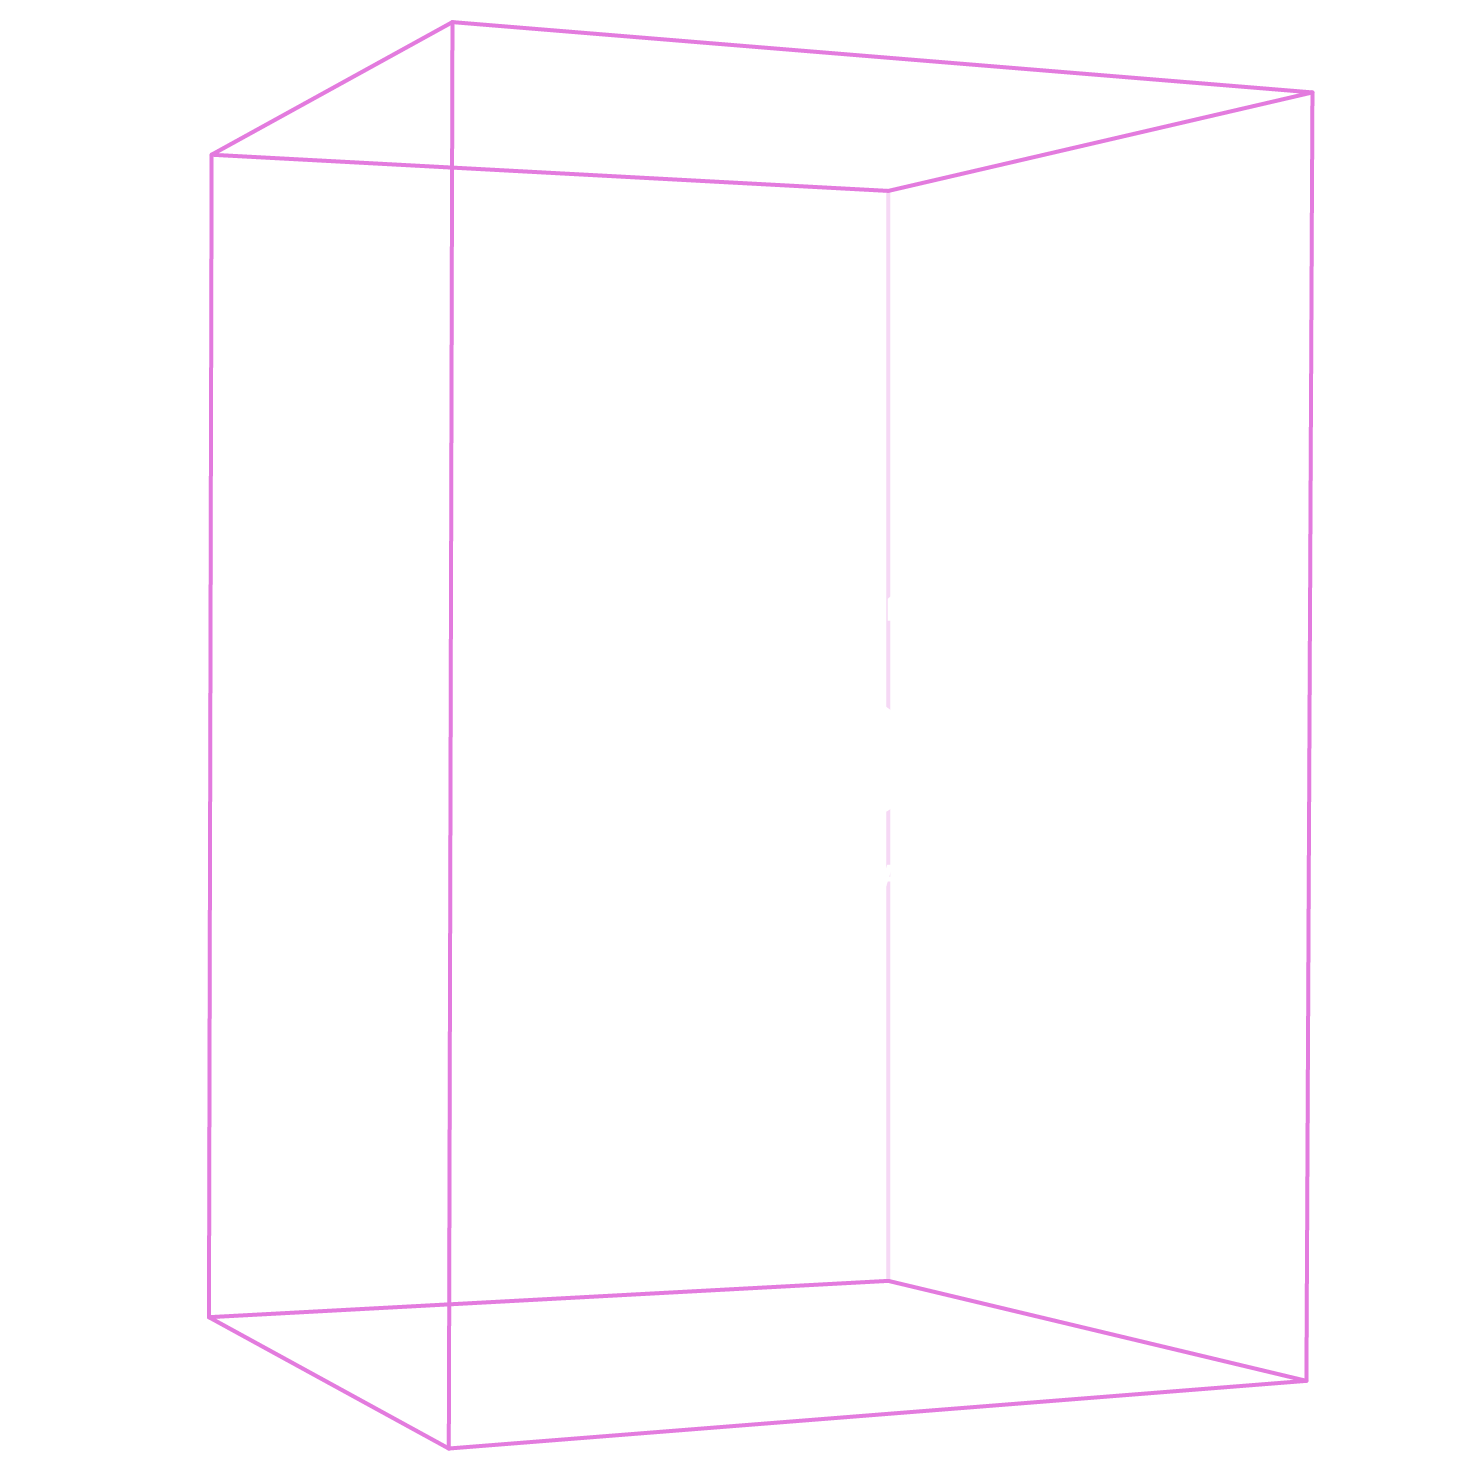 wi-fi now awards graphic